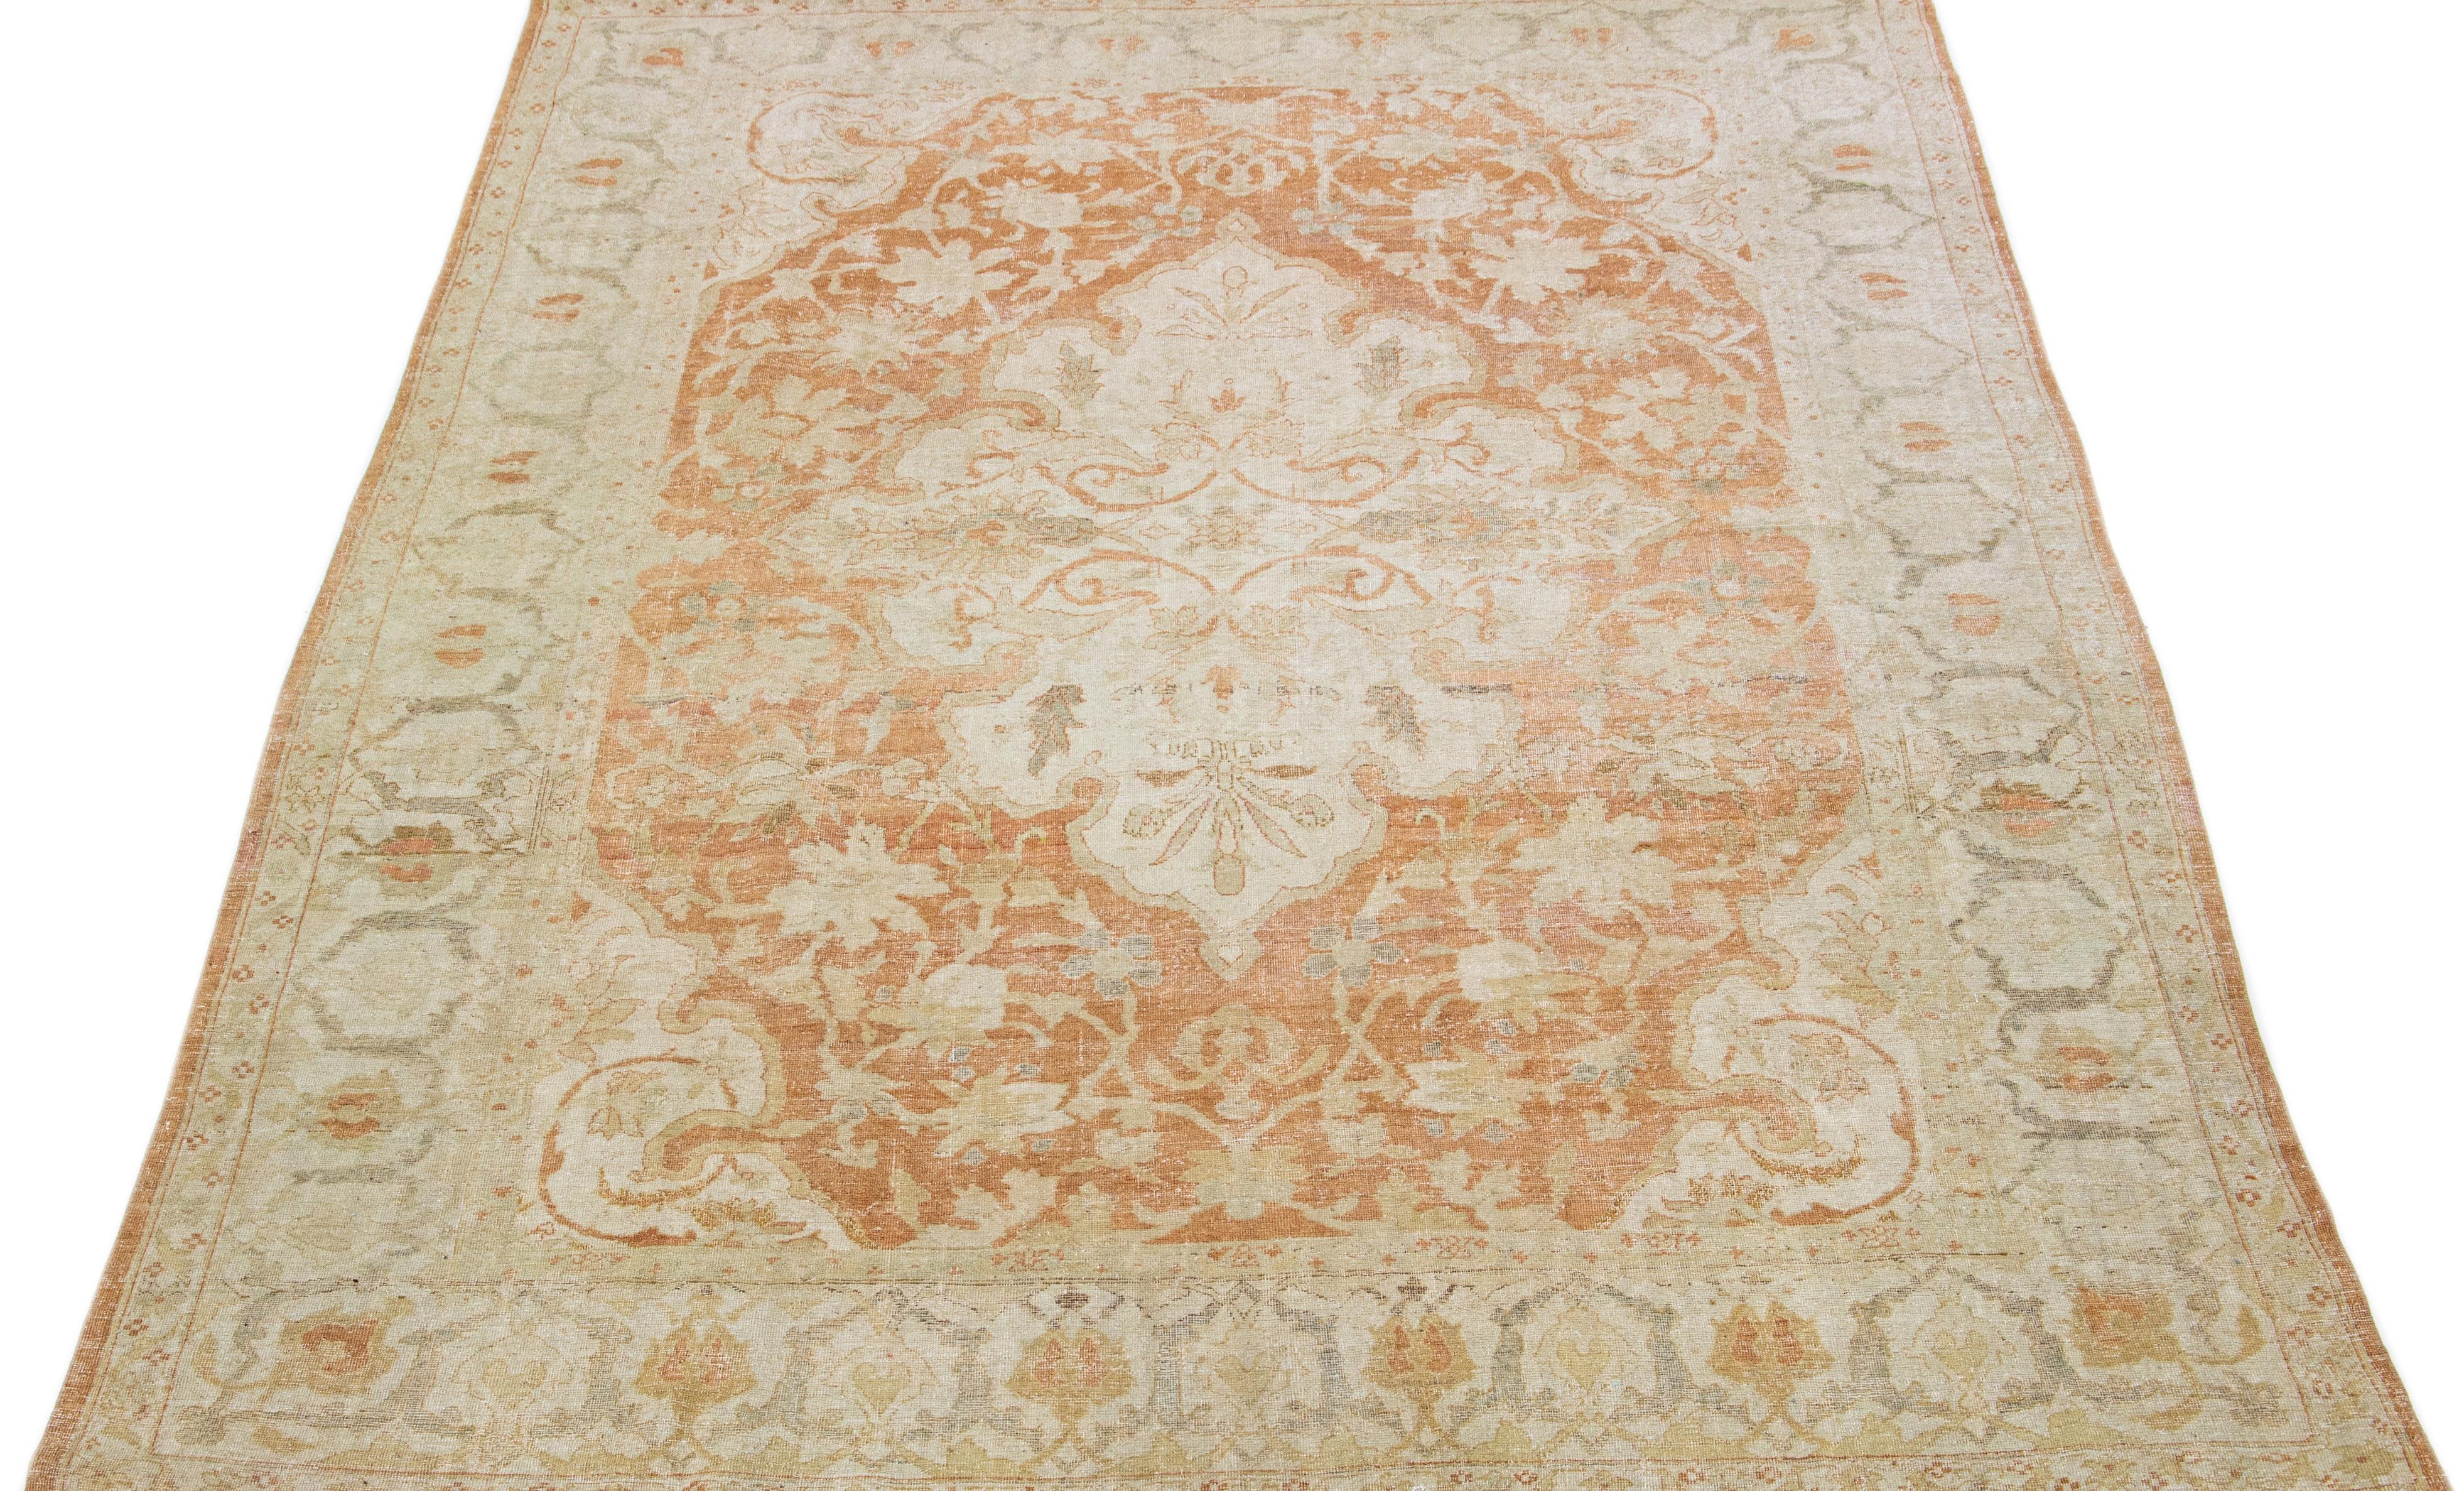 This exquisite hand-knotted Agra wool rug features a rust field accented by beige and gray motifs in a timeless medallion floral pattern.

This rug measures: 8.11